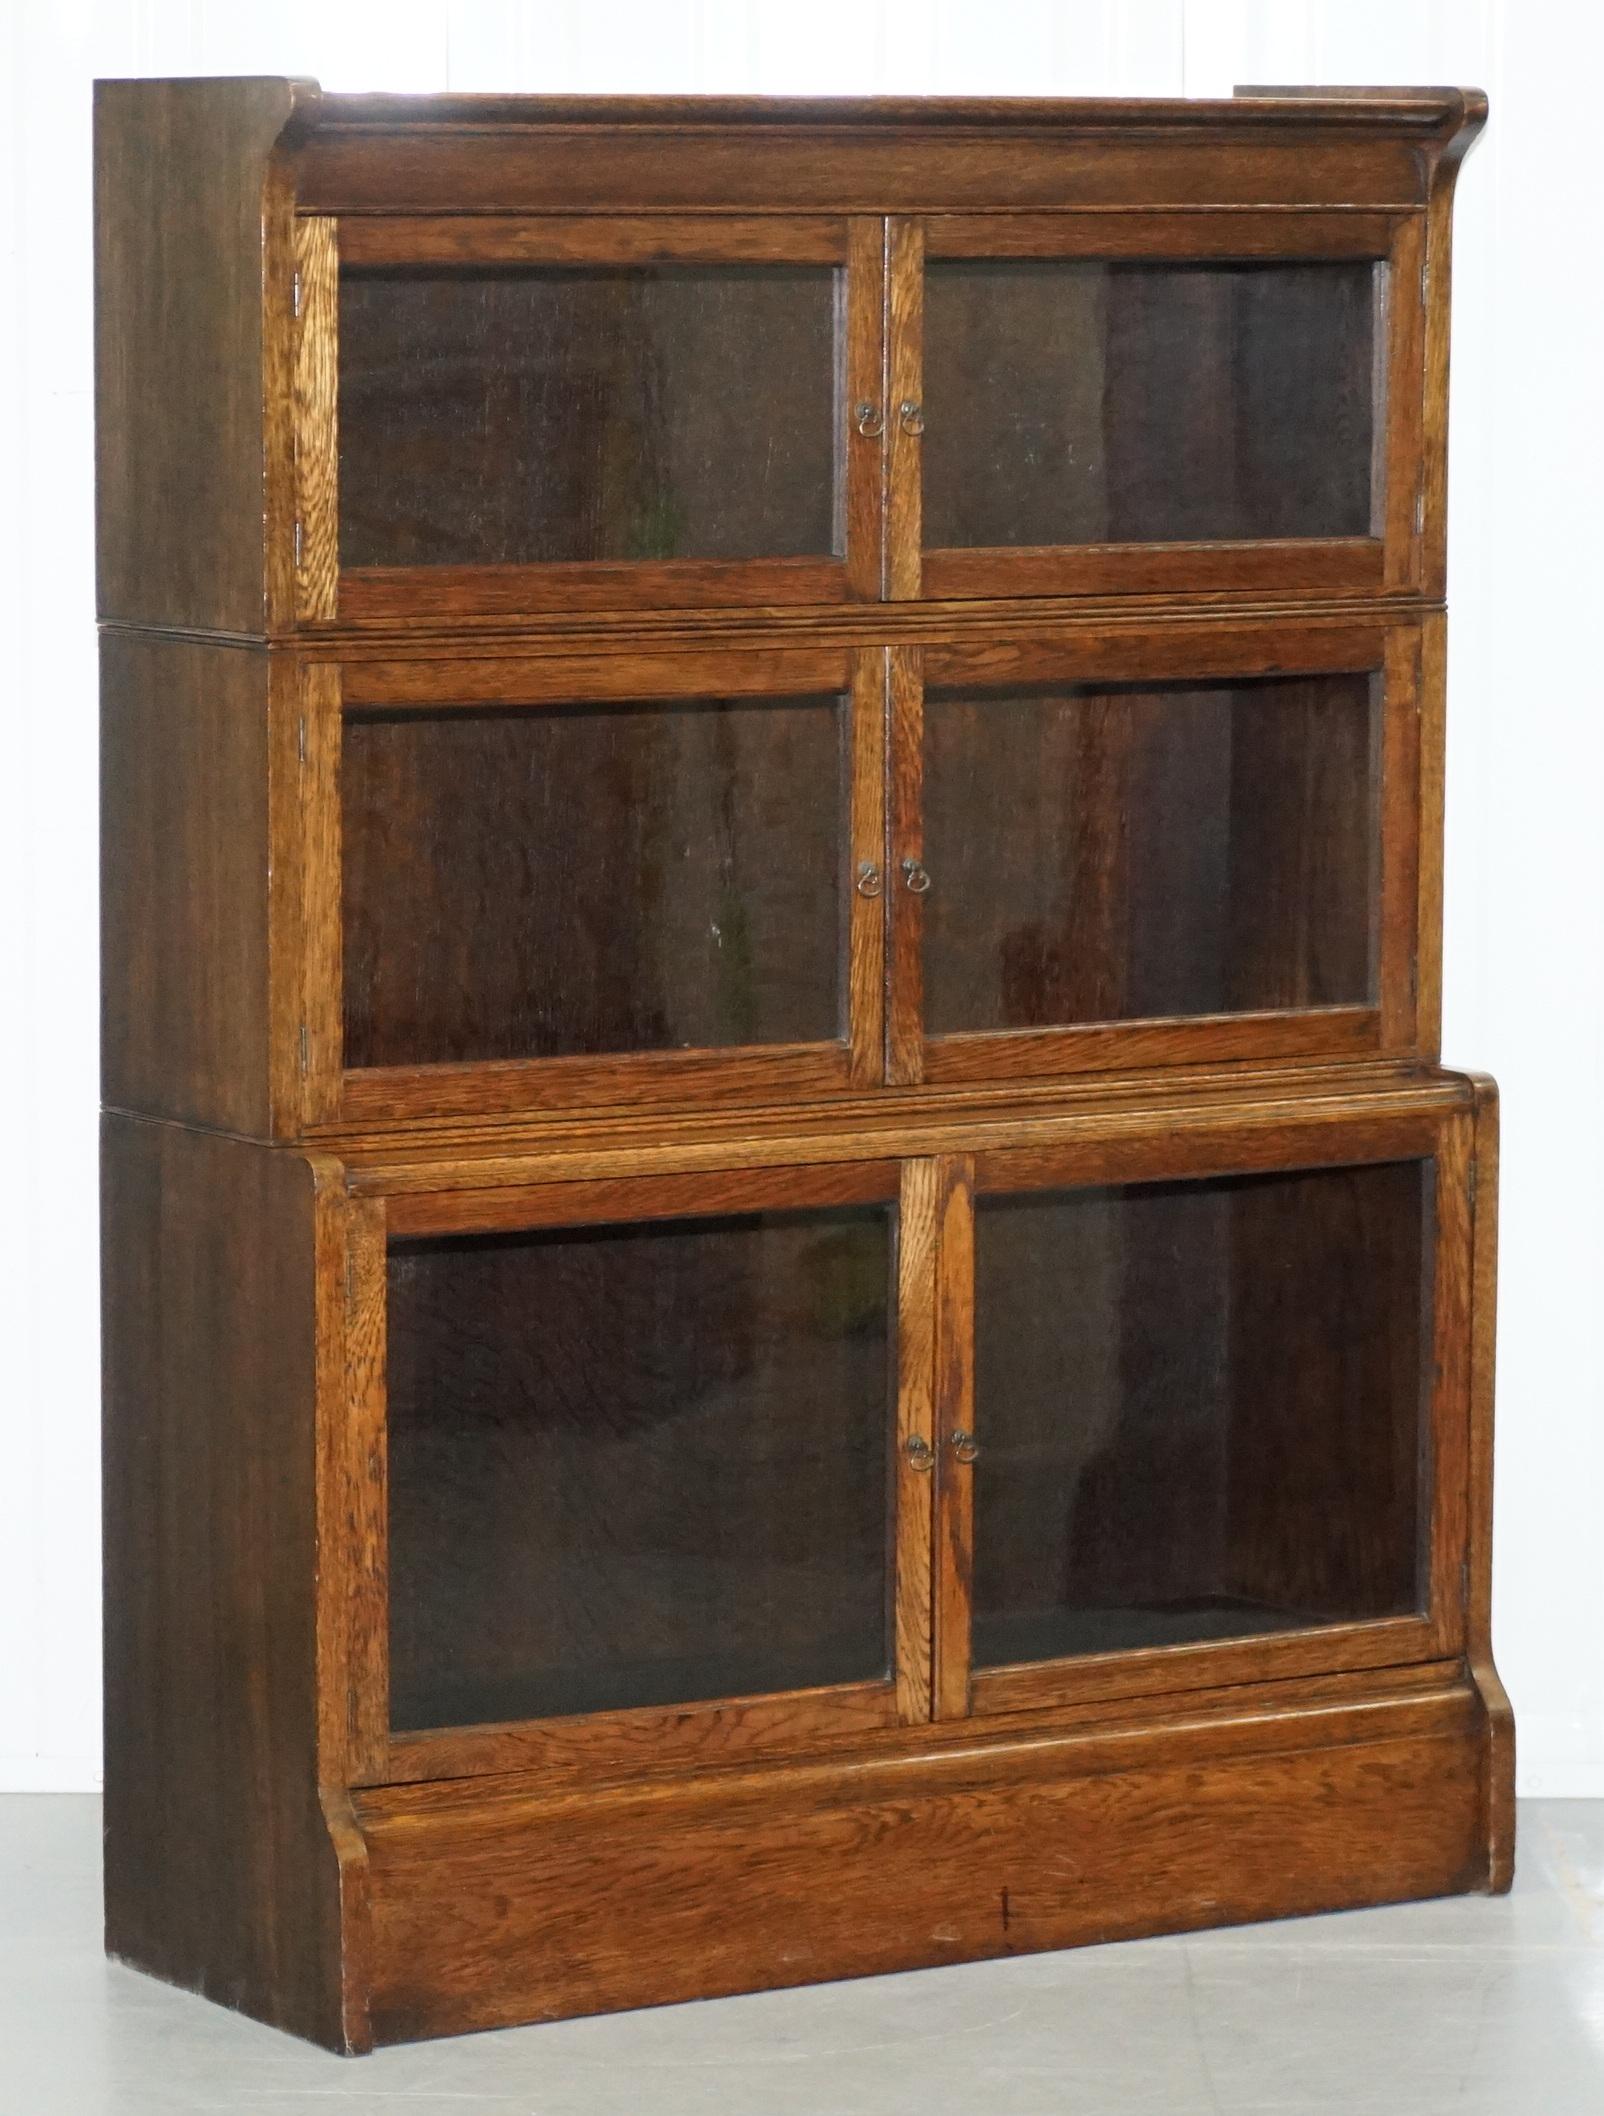 We are delighted to offer for sale this lovely pair of original William Baker Co Oxford solid oak Legal stacking modular bookcases.

A very good looking and well-made pair, there were a number of companies making this type of bookcase in the late